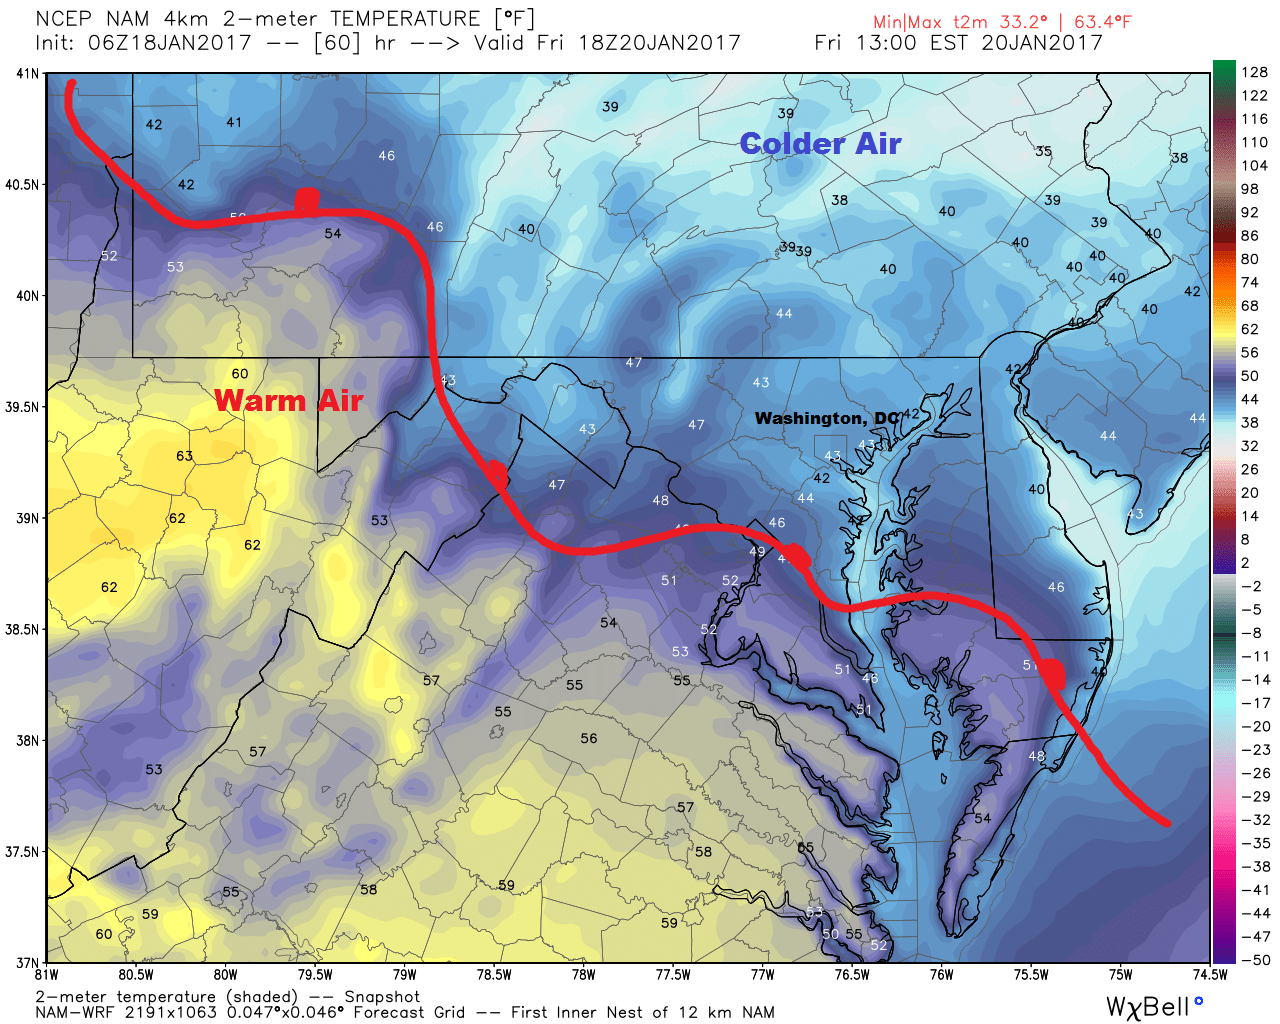 Temperatures will be cool with rain Friday morning in Washington, DC